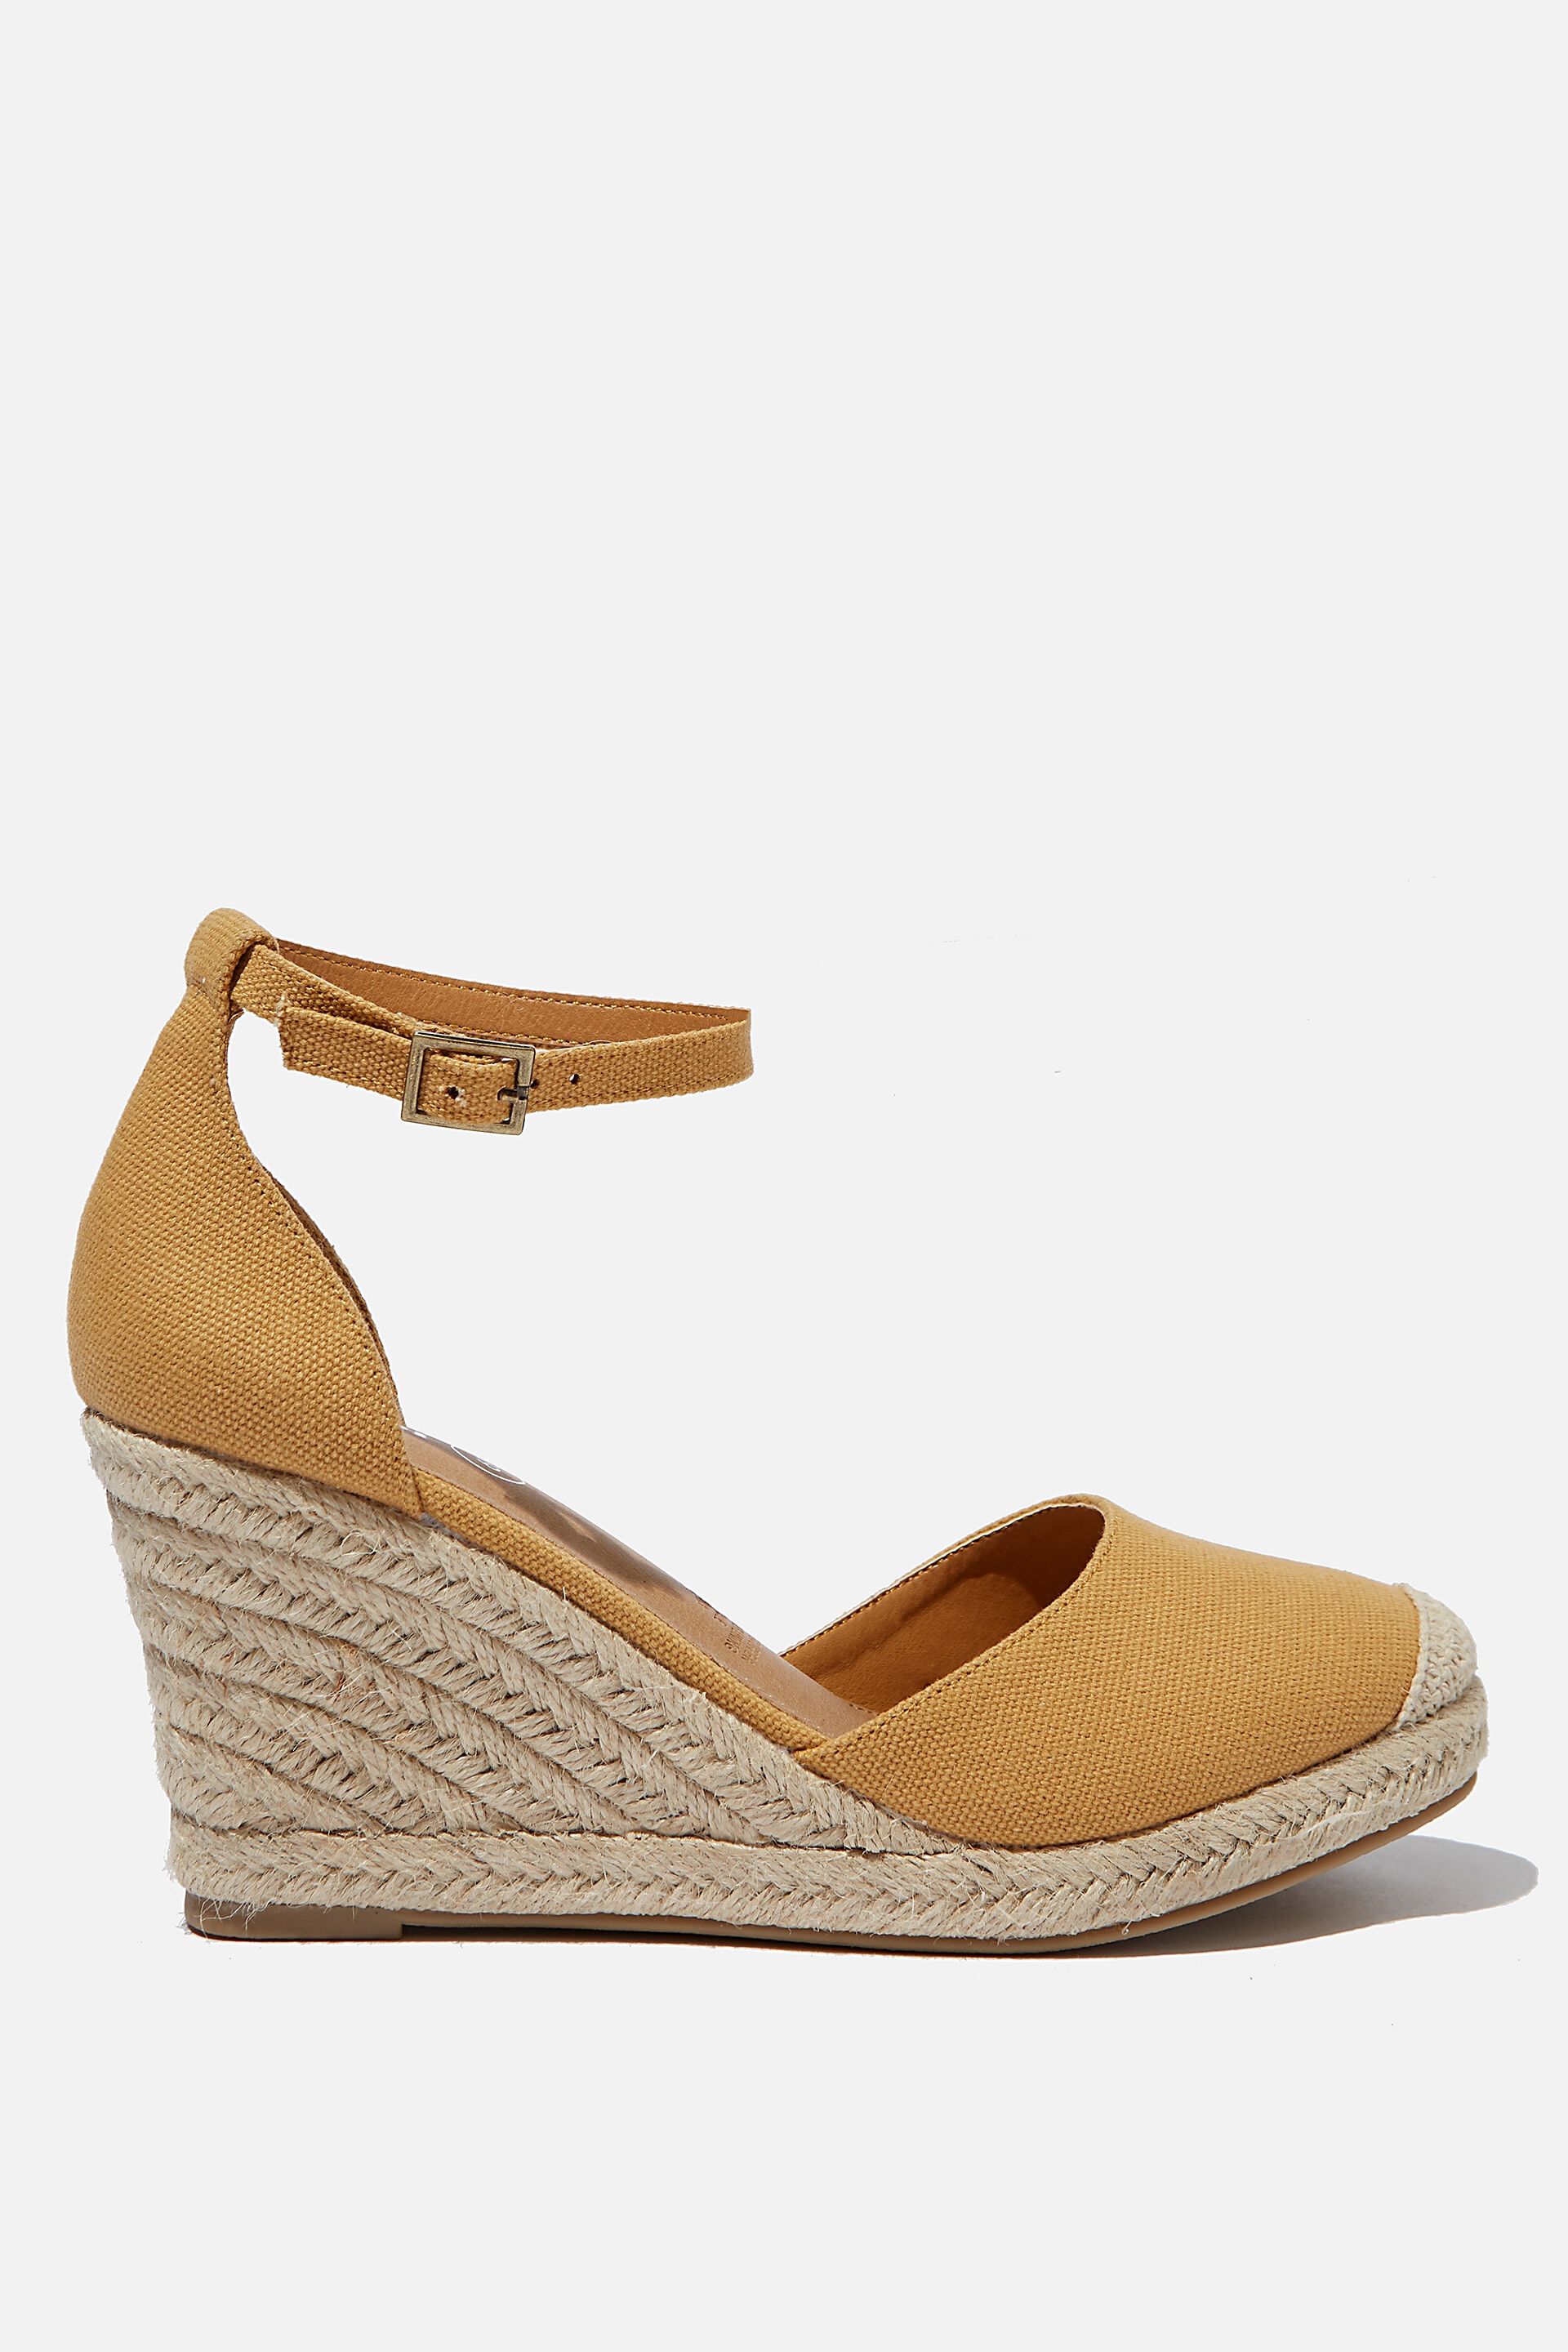 Florence Closed Toe Wedge | Women's 